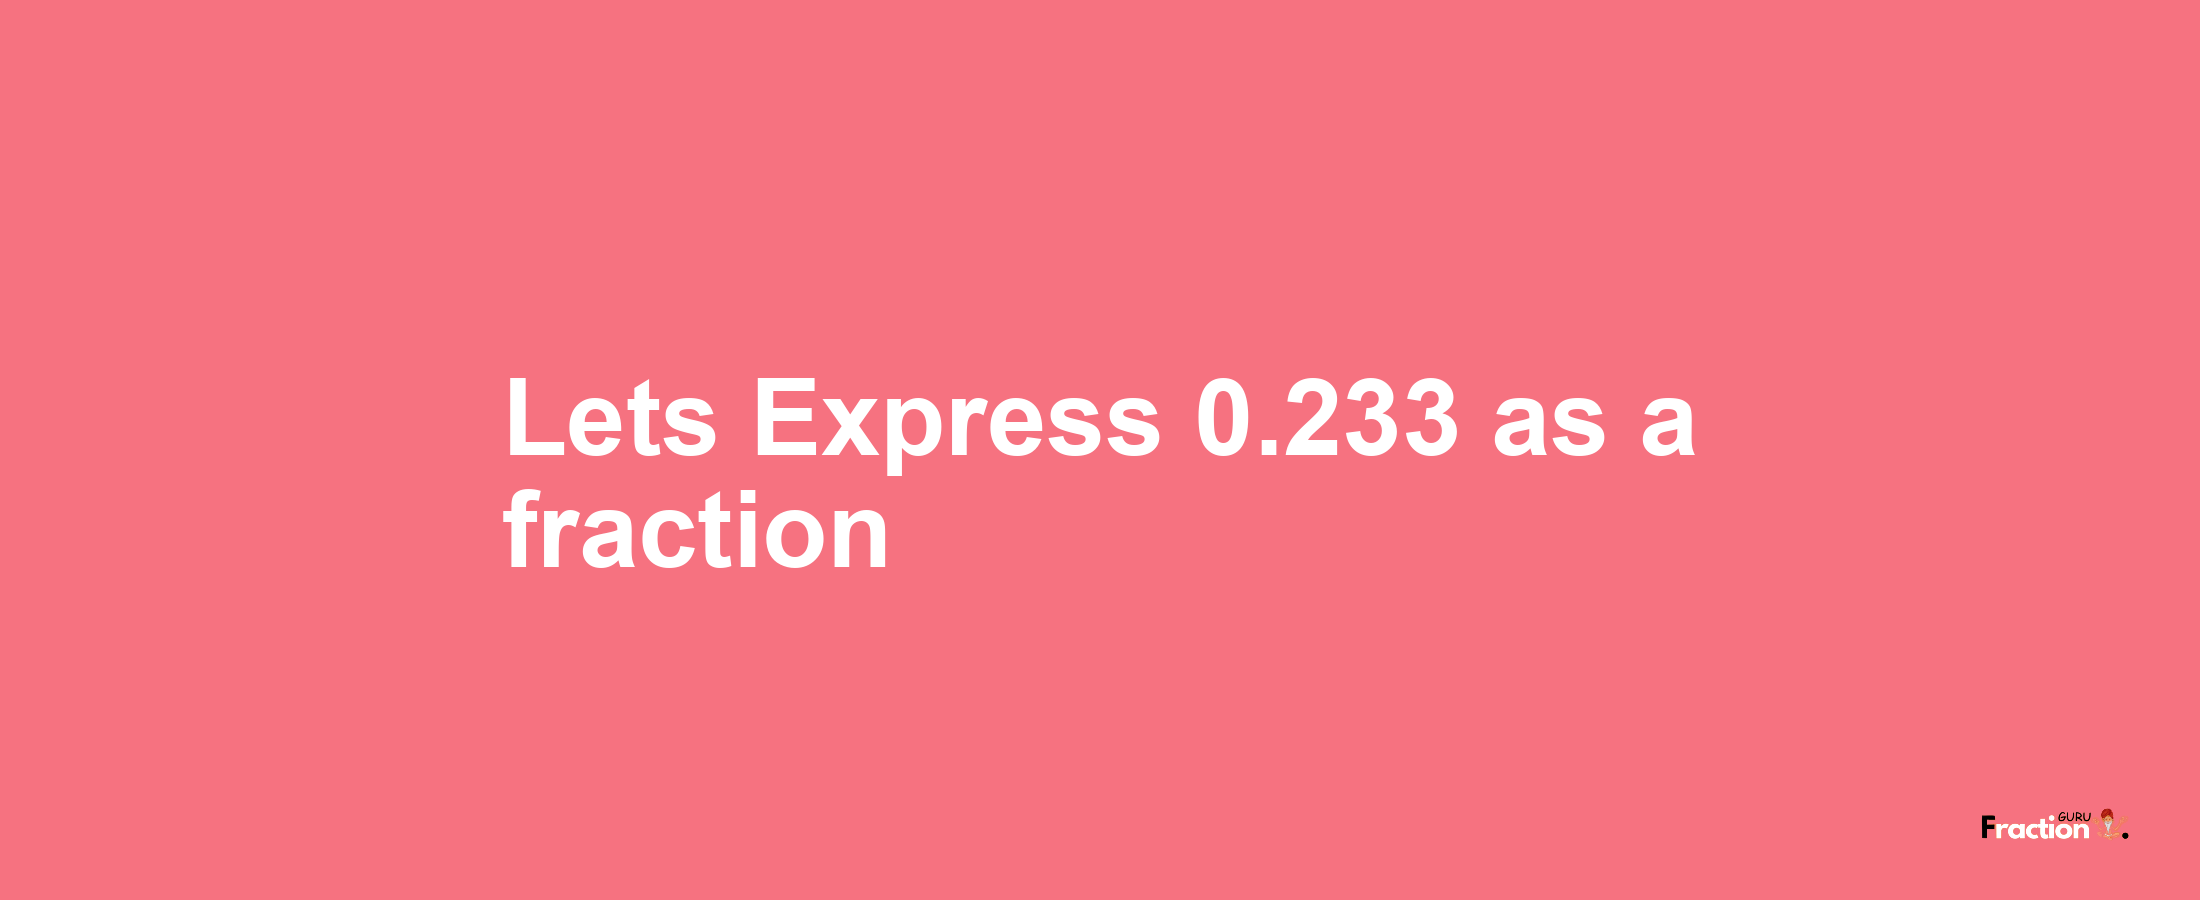 Lets Express 0.233 as afraction